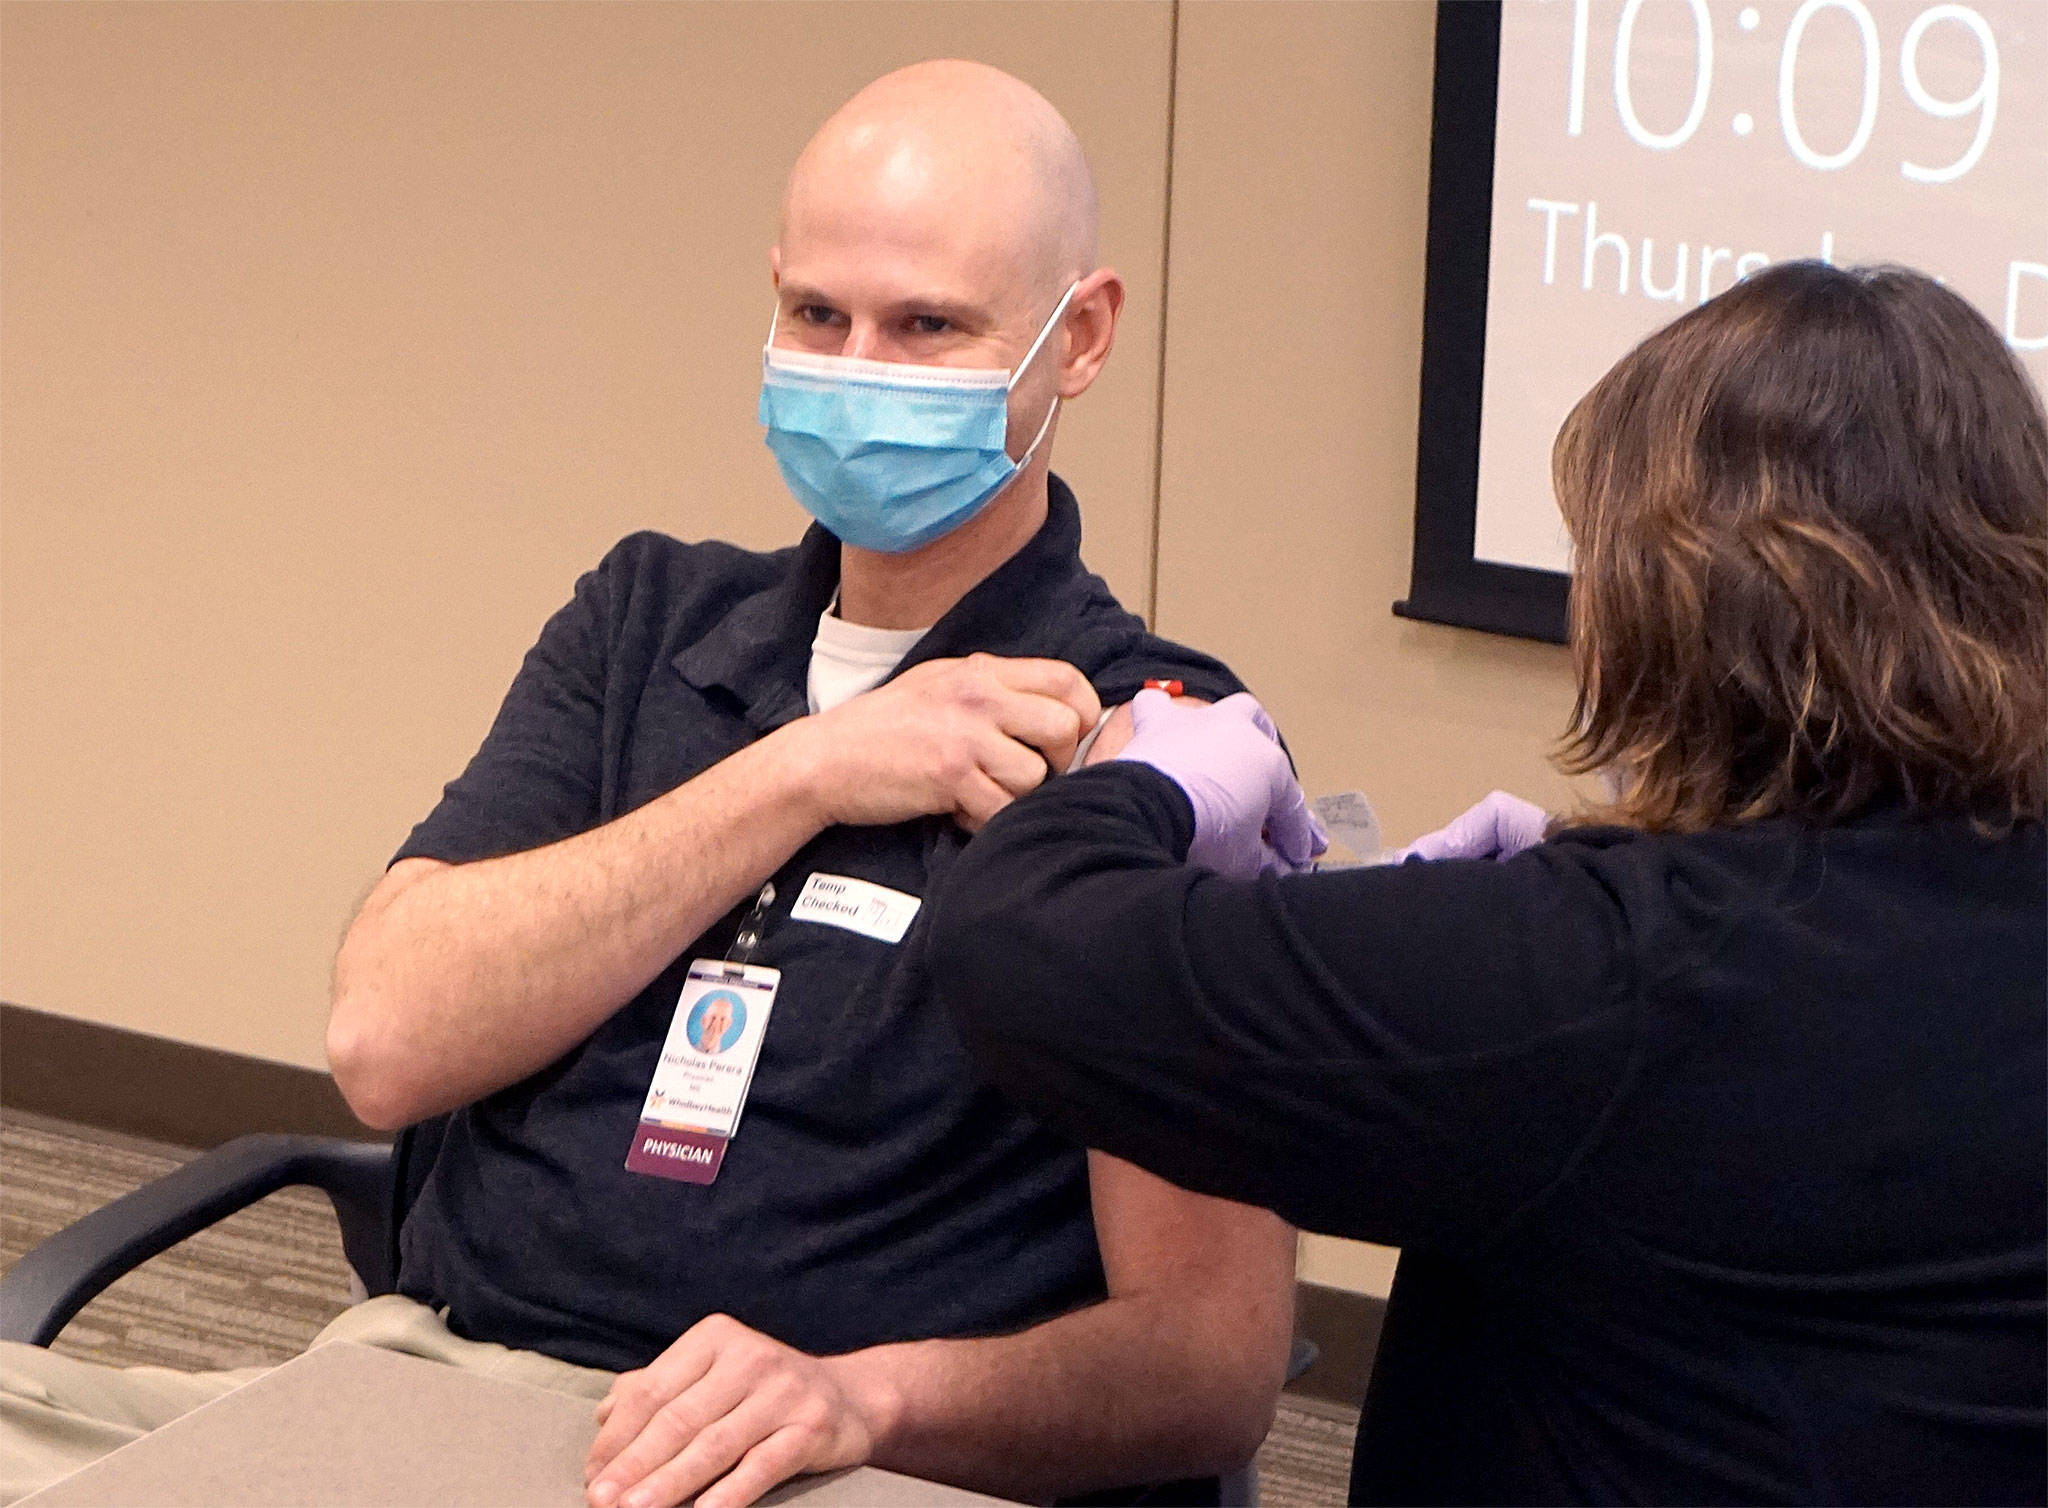 On Thursday, Dr. Nick Perera, chief of staff and Emergency Department medical director, became the first person in Island County to be vaccinated for COVID-19. Photo courtesy of WhidbeyHealth